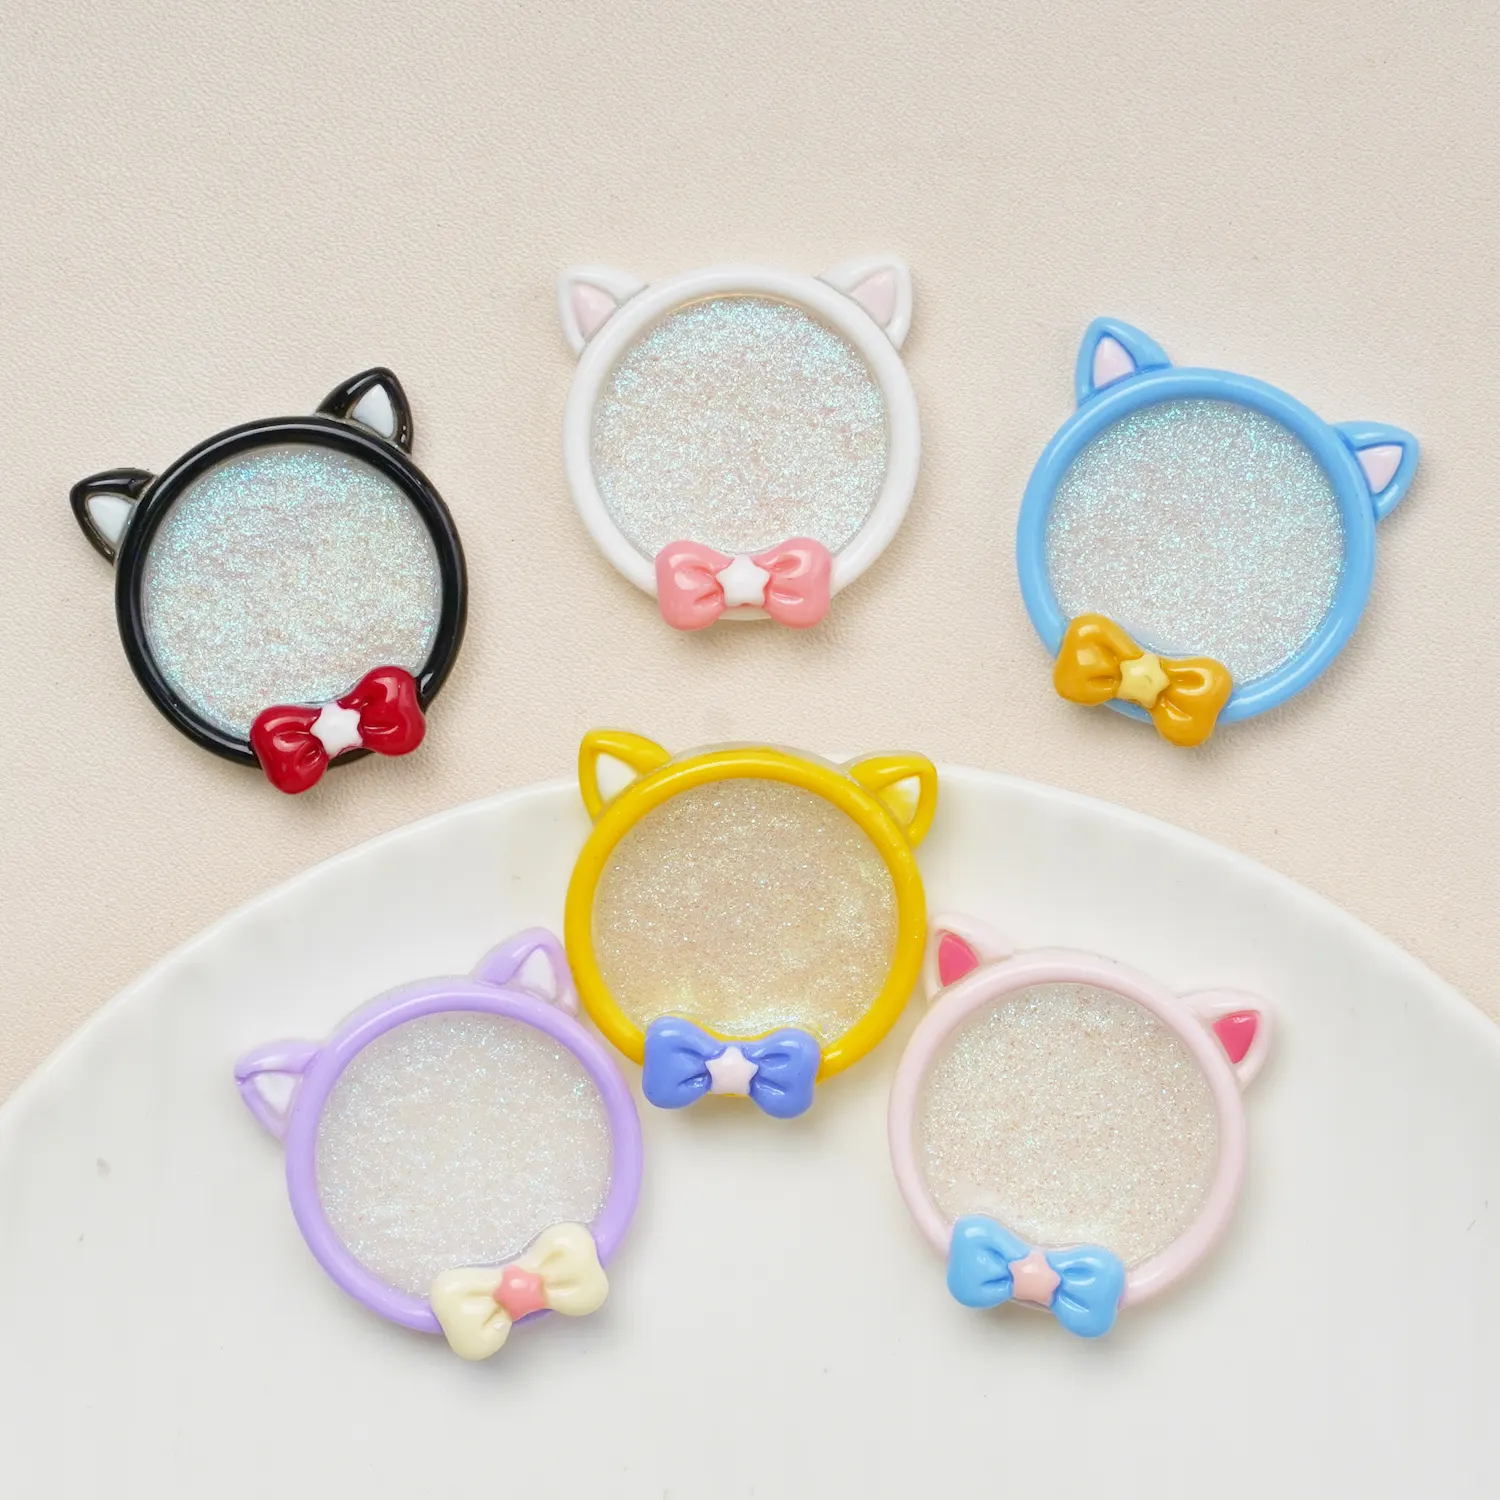 Wholesale Flatback Mirror Shape With Cat Ear Resin Accessories For Cell Phone Chain Pendant DIY Handmade Bag Hanging Materials